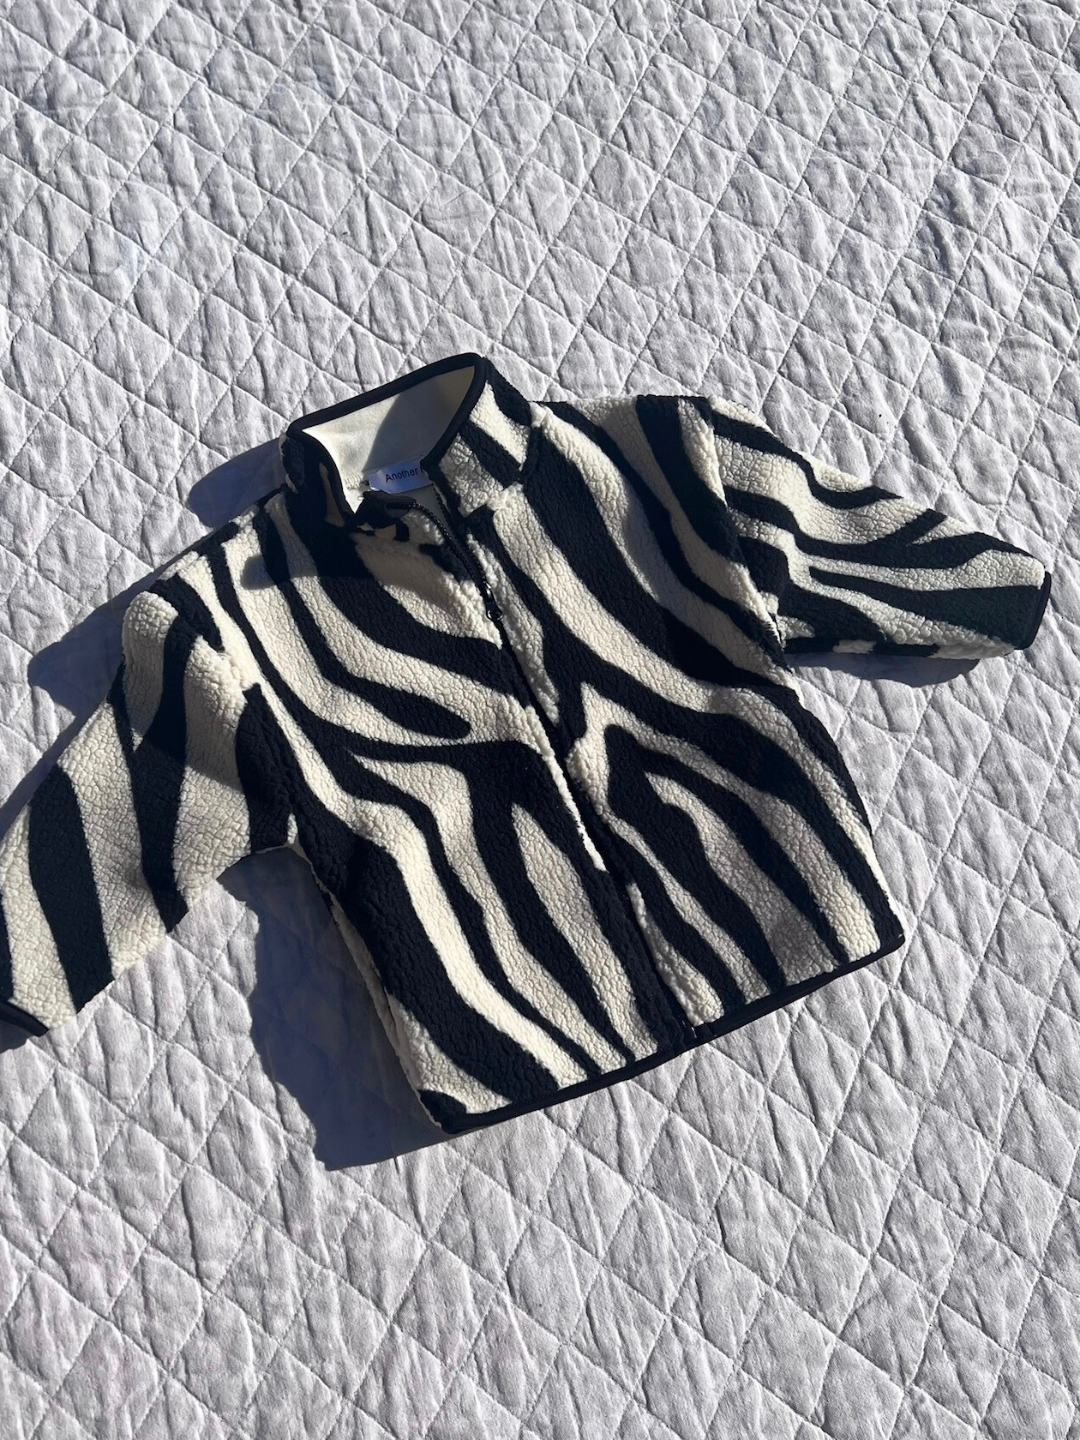 Kids fleece jacket in a black and cream tiger stripe pattern, laid down on a white quilt.